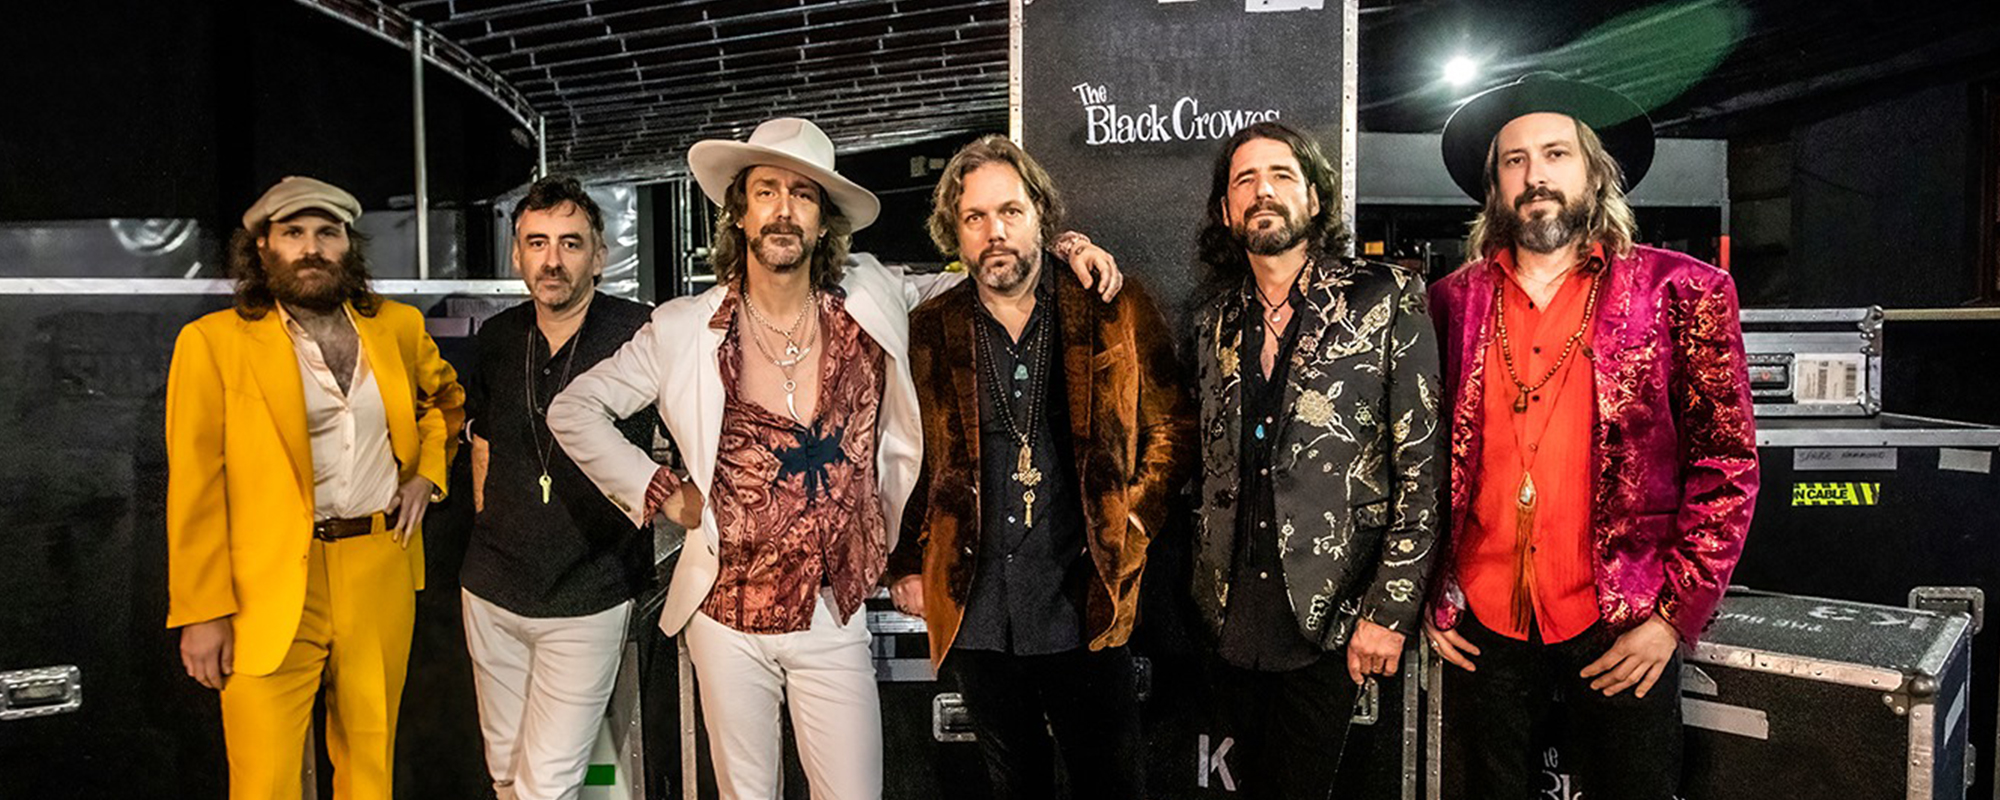 The Black Crowes Share New EP, “1972”